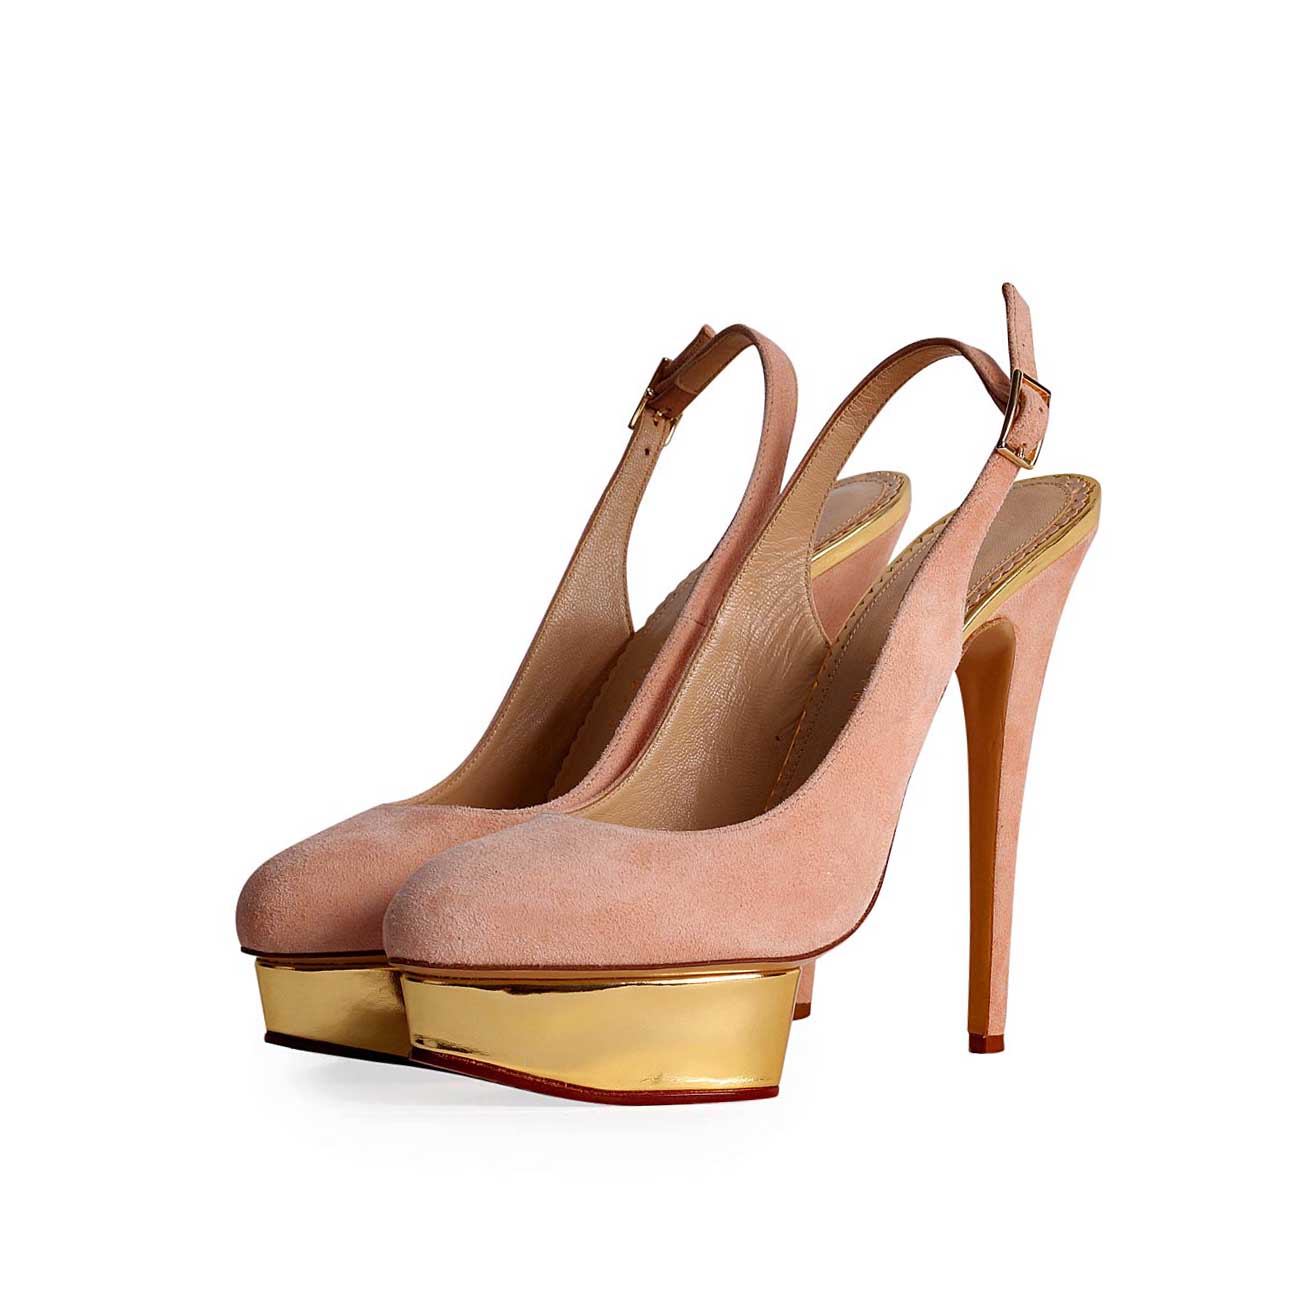 snemand Kostume jage CHARLOTTE OLYMPIA Suede Dolly Slingback Pumps Nude - S: 41 (7.5) - NEW |  Luxity